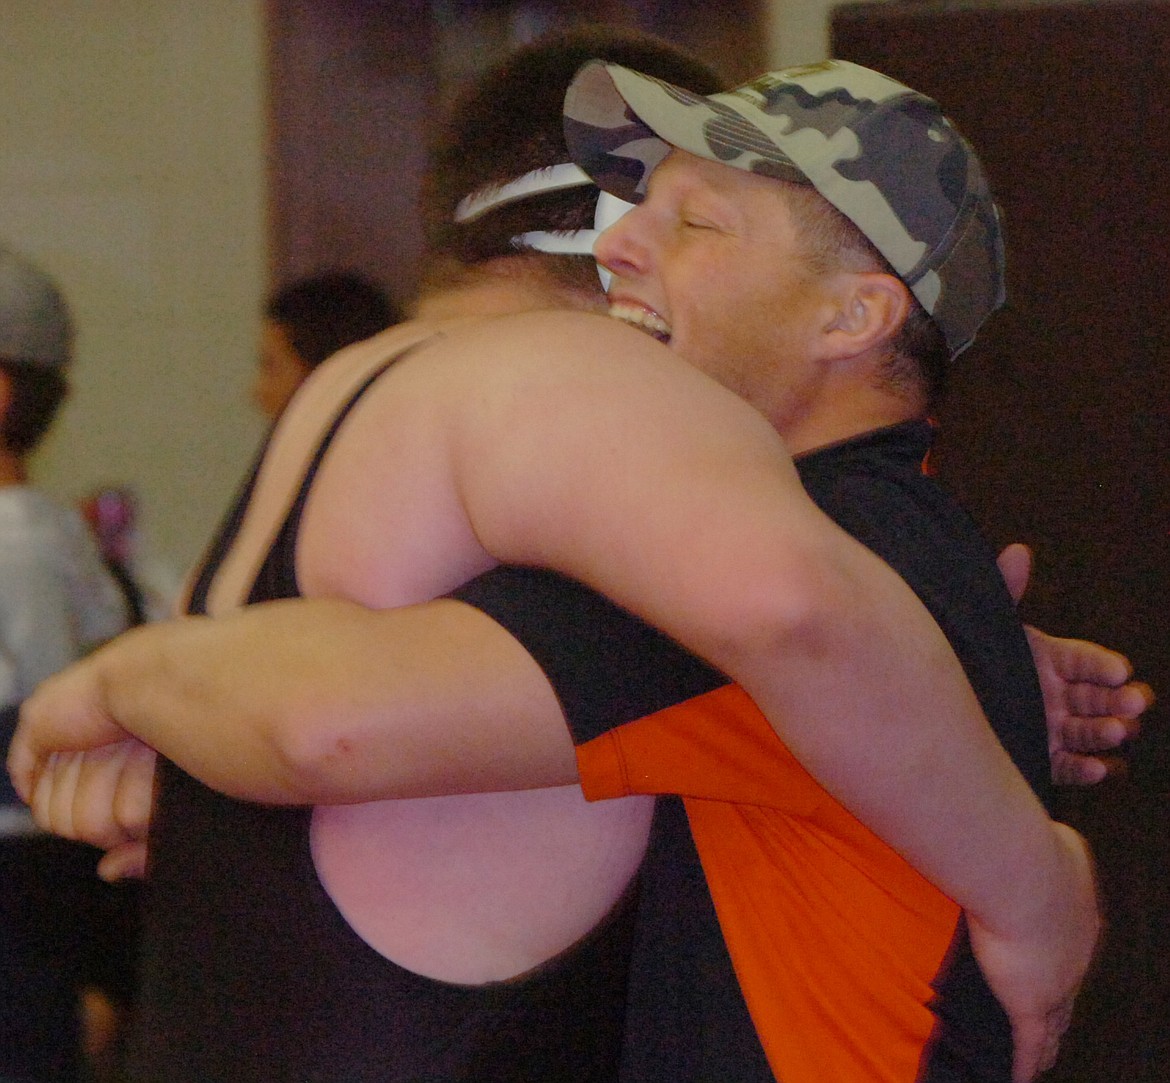 Plains/Hot Springs heavyweight class wrestler Steven Yother gets a congratulatory hug from assistant coach Rocky Wagner after Yother won his first match of the season last weekend at the Western Montana Duals in Ronan. (Joe Sova/Clark Fork Valley Press)